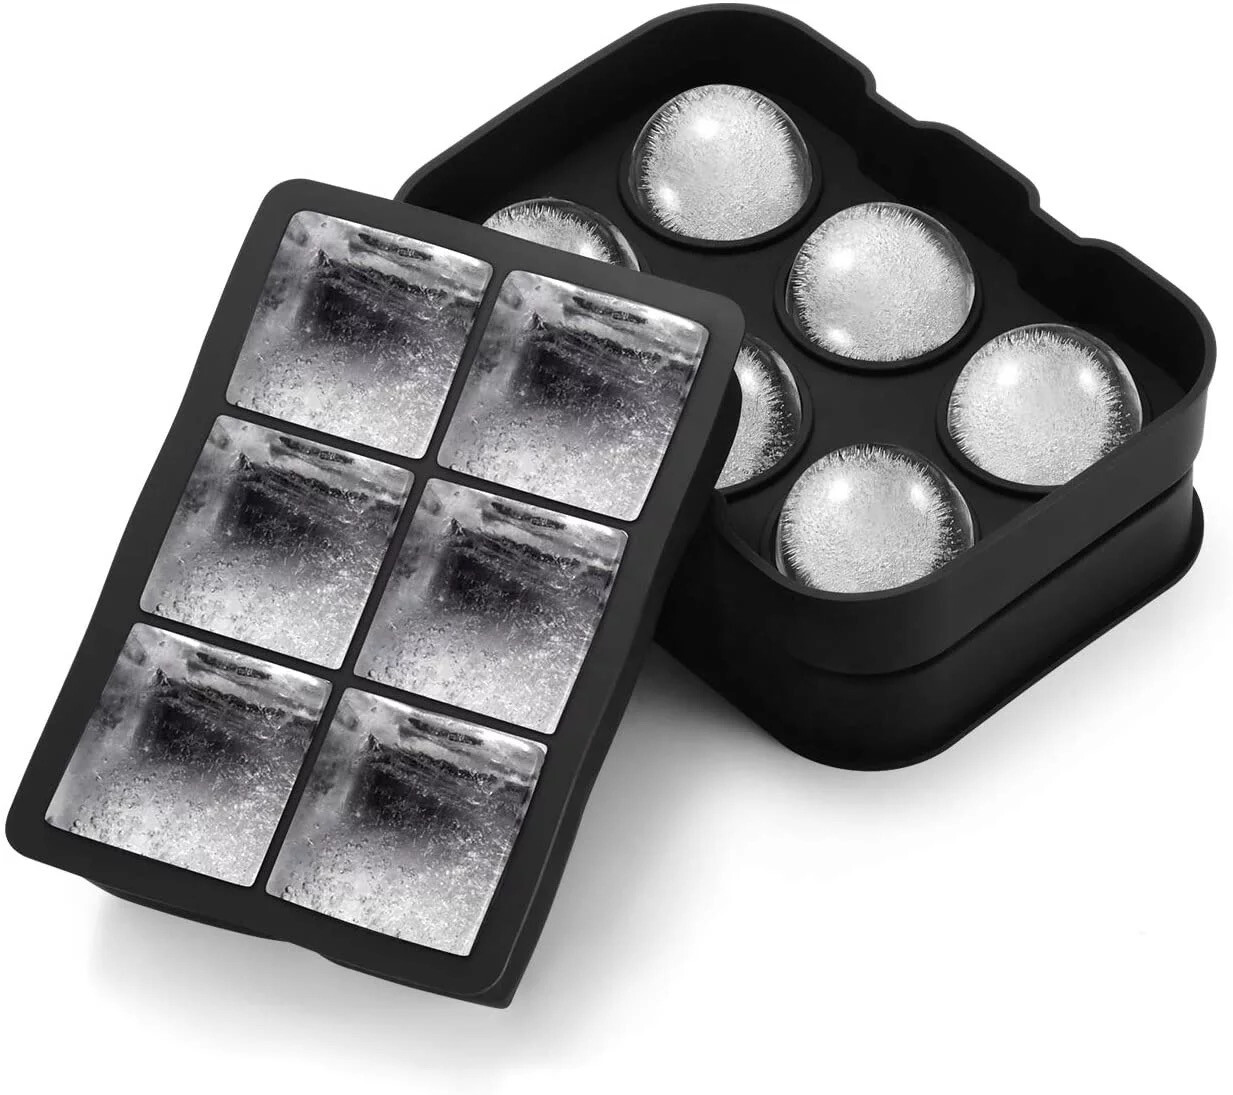 Sphere / Square Whisky Silicon Ice Mould - 5cm